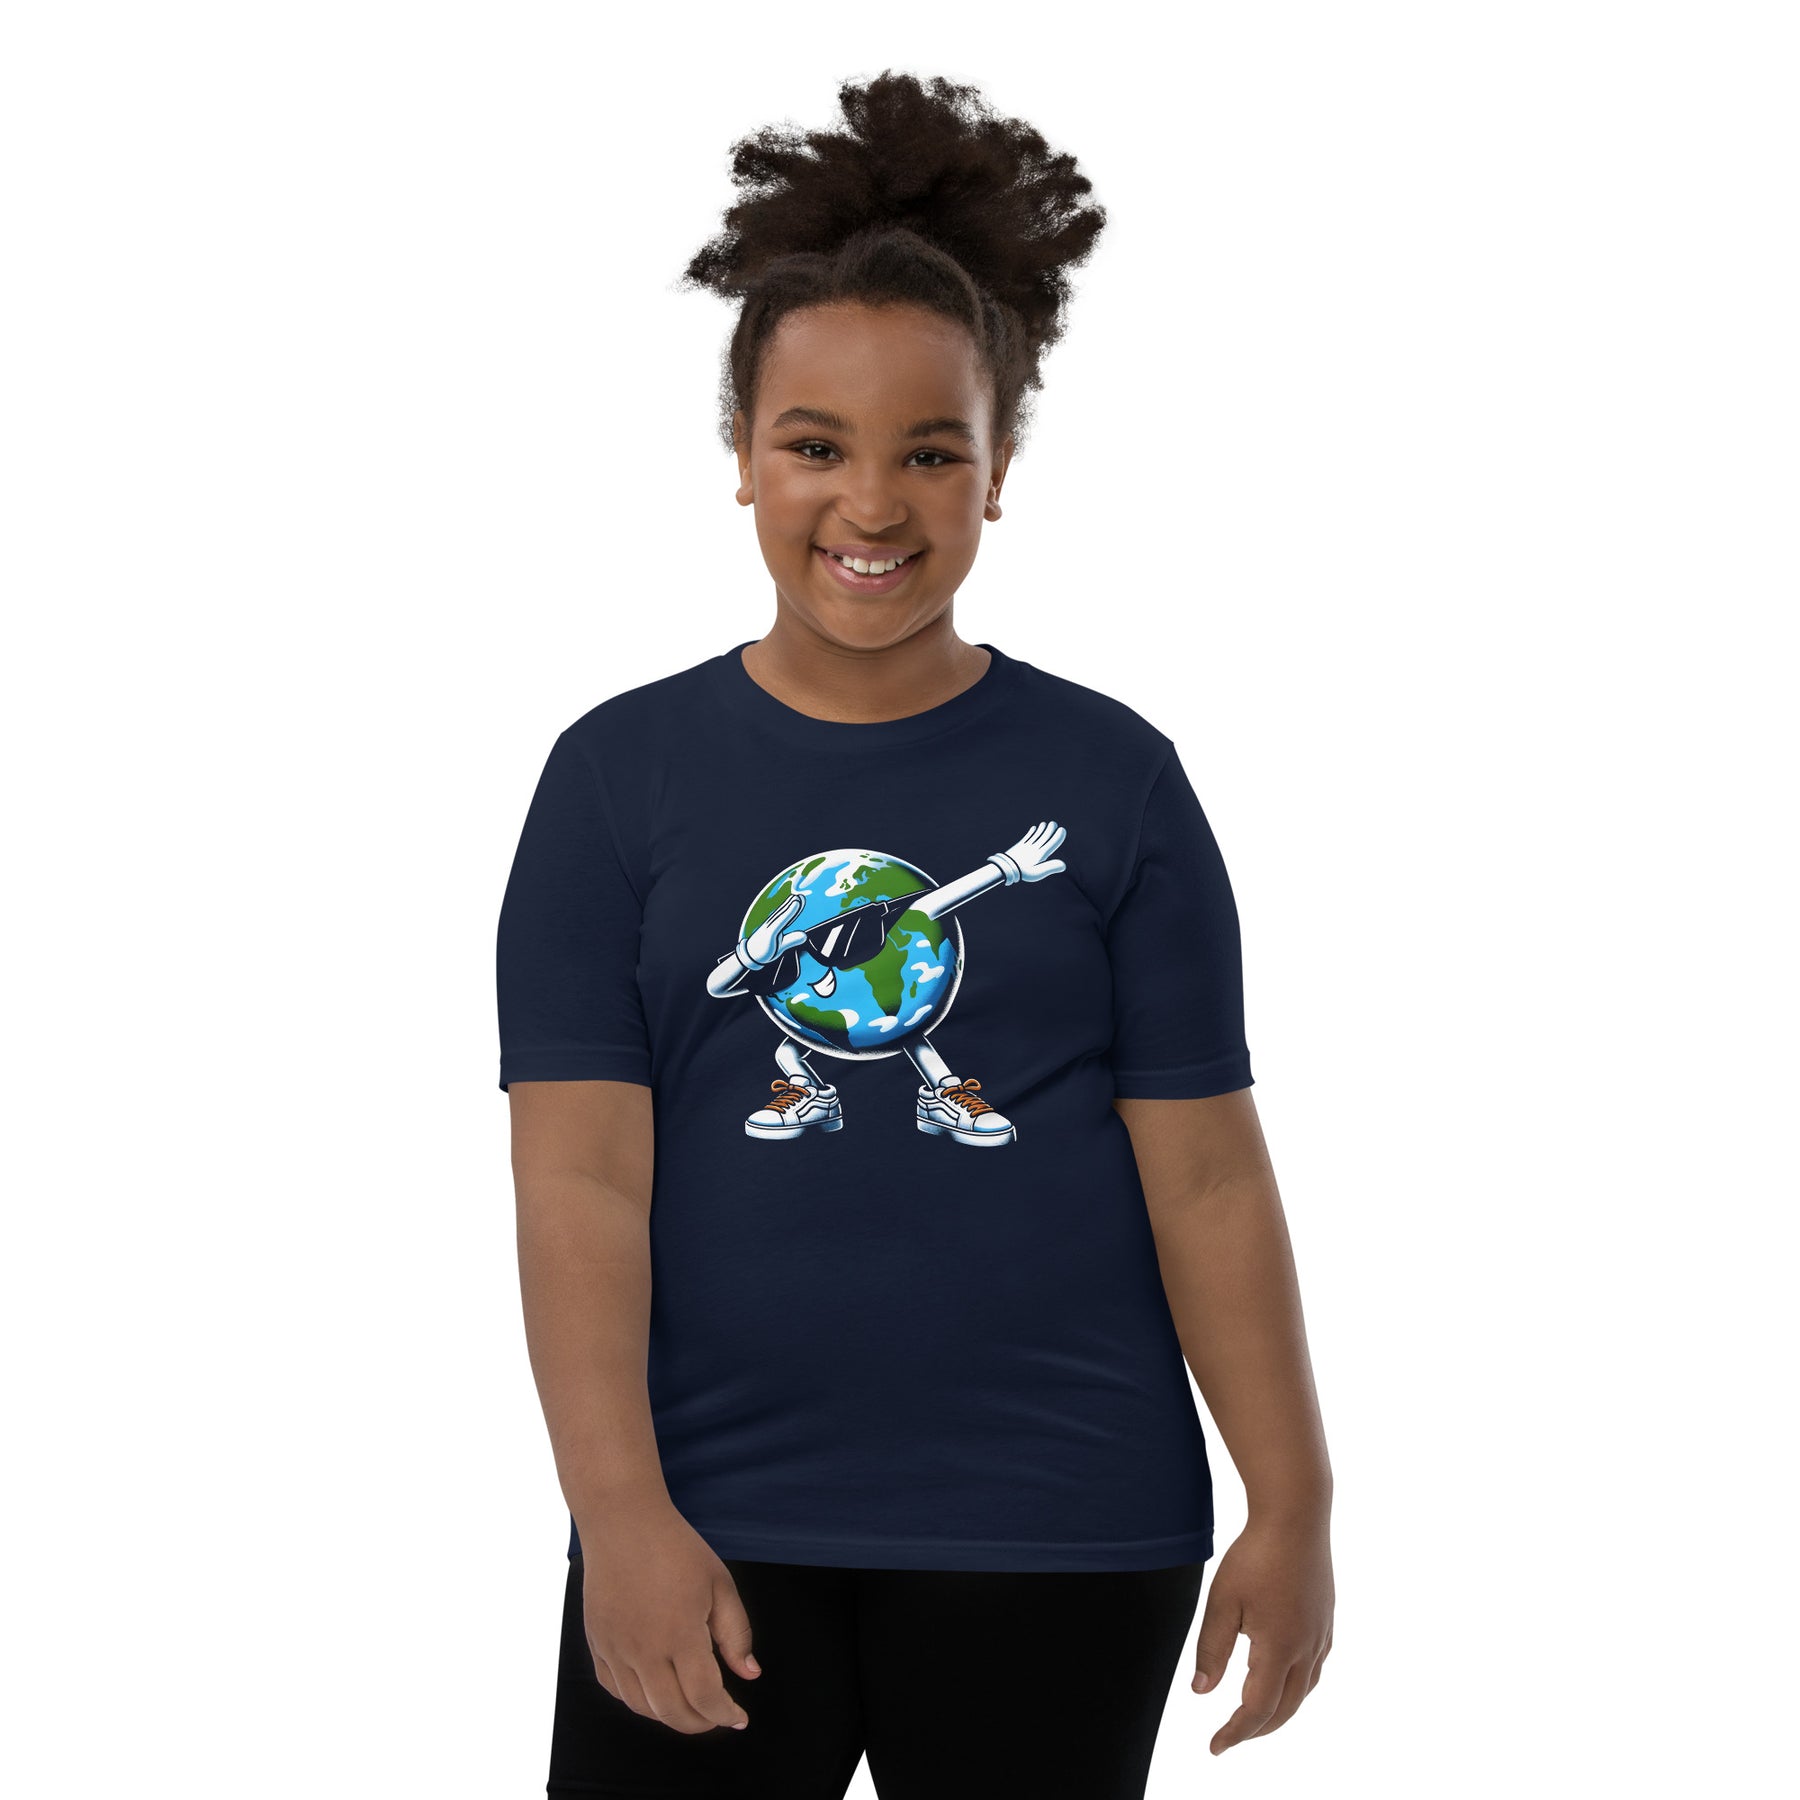 Funny Dabbing Earth Shirt, Planet Lover Tee, Happy Earth Day Celebration, Embrace Care & Dab Dance Fun, April 22